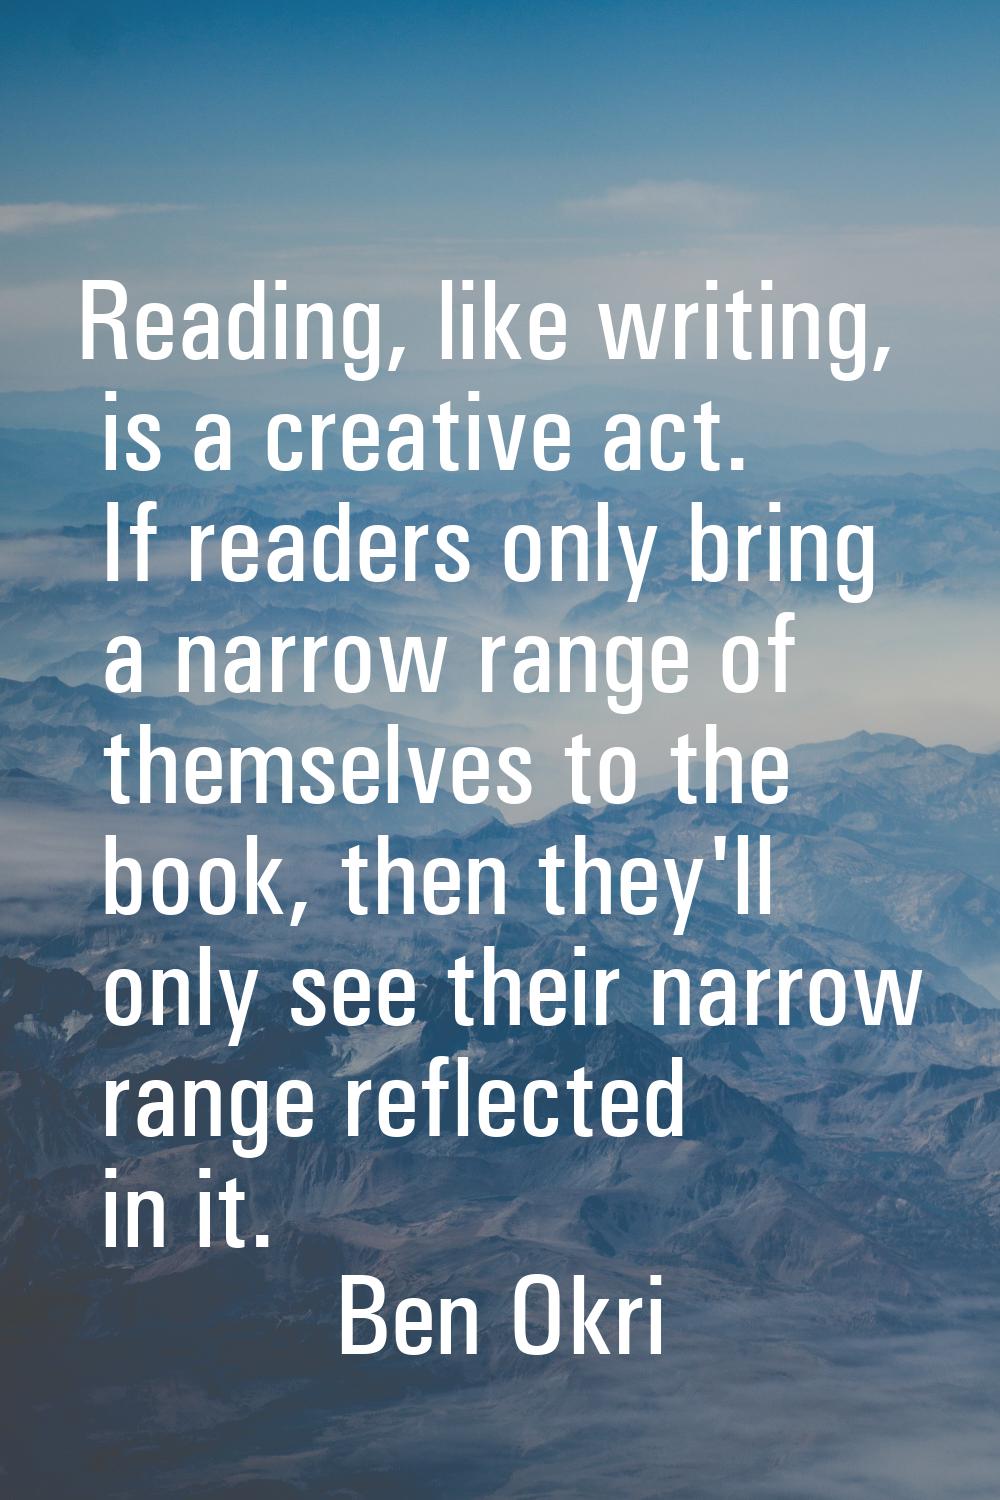 Reading, like writing, is a creative act. If readers only bring a narrow range of themselves to the